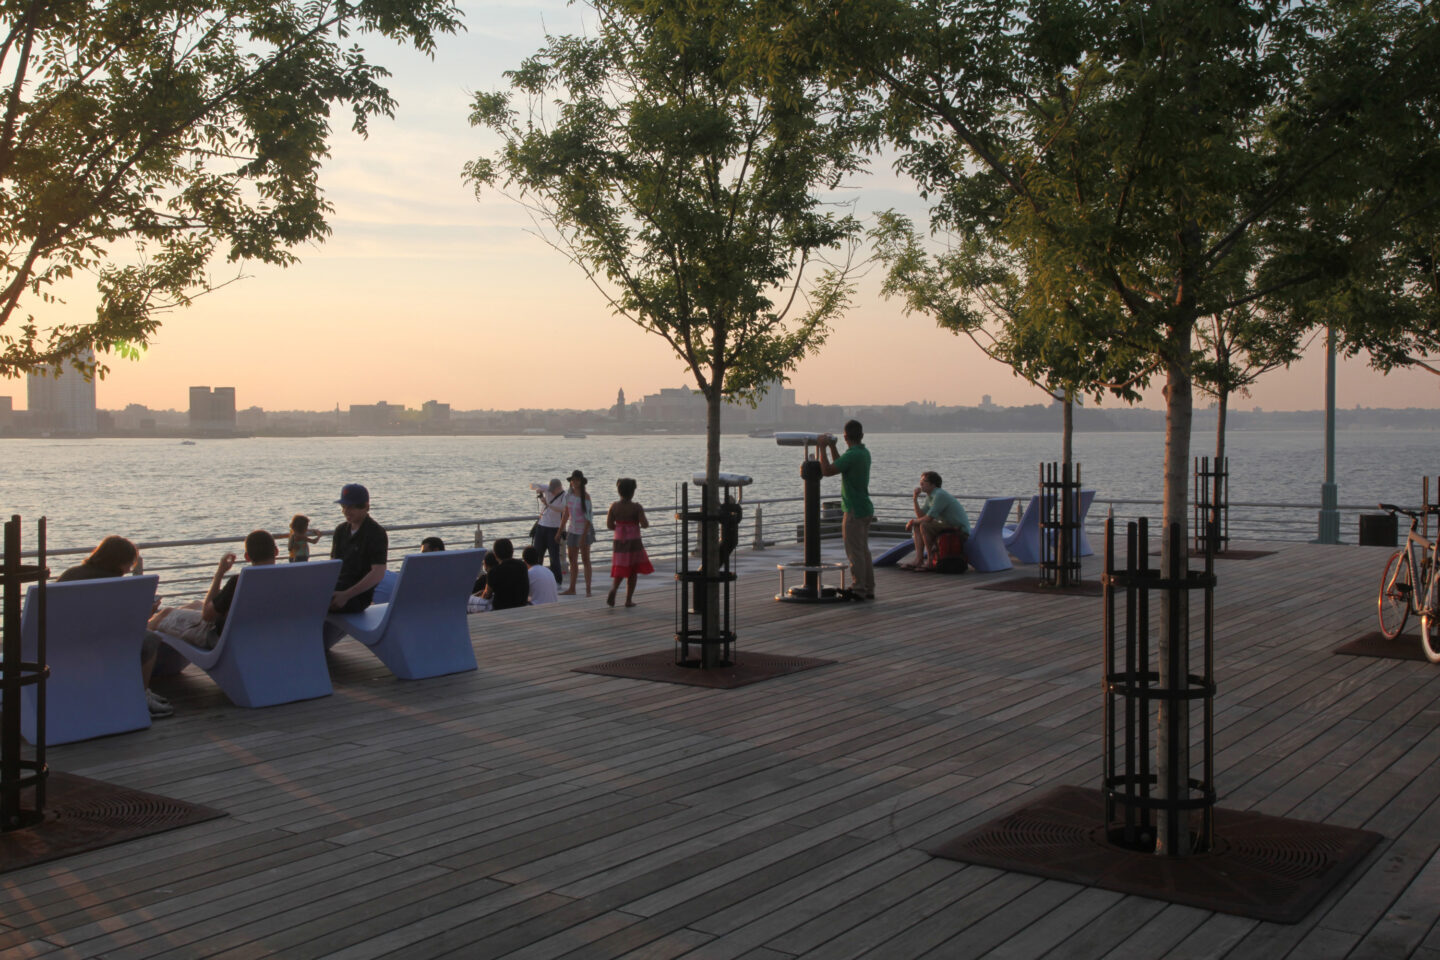 People gathered at the end of Pier 25 looking out at the sunset on the Hudson river